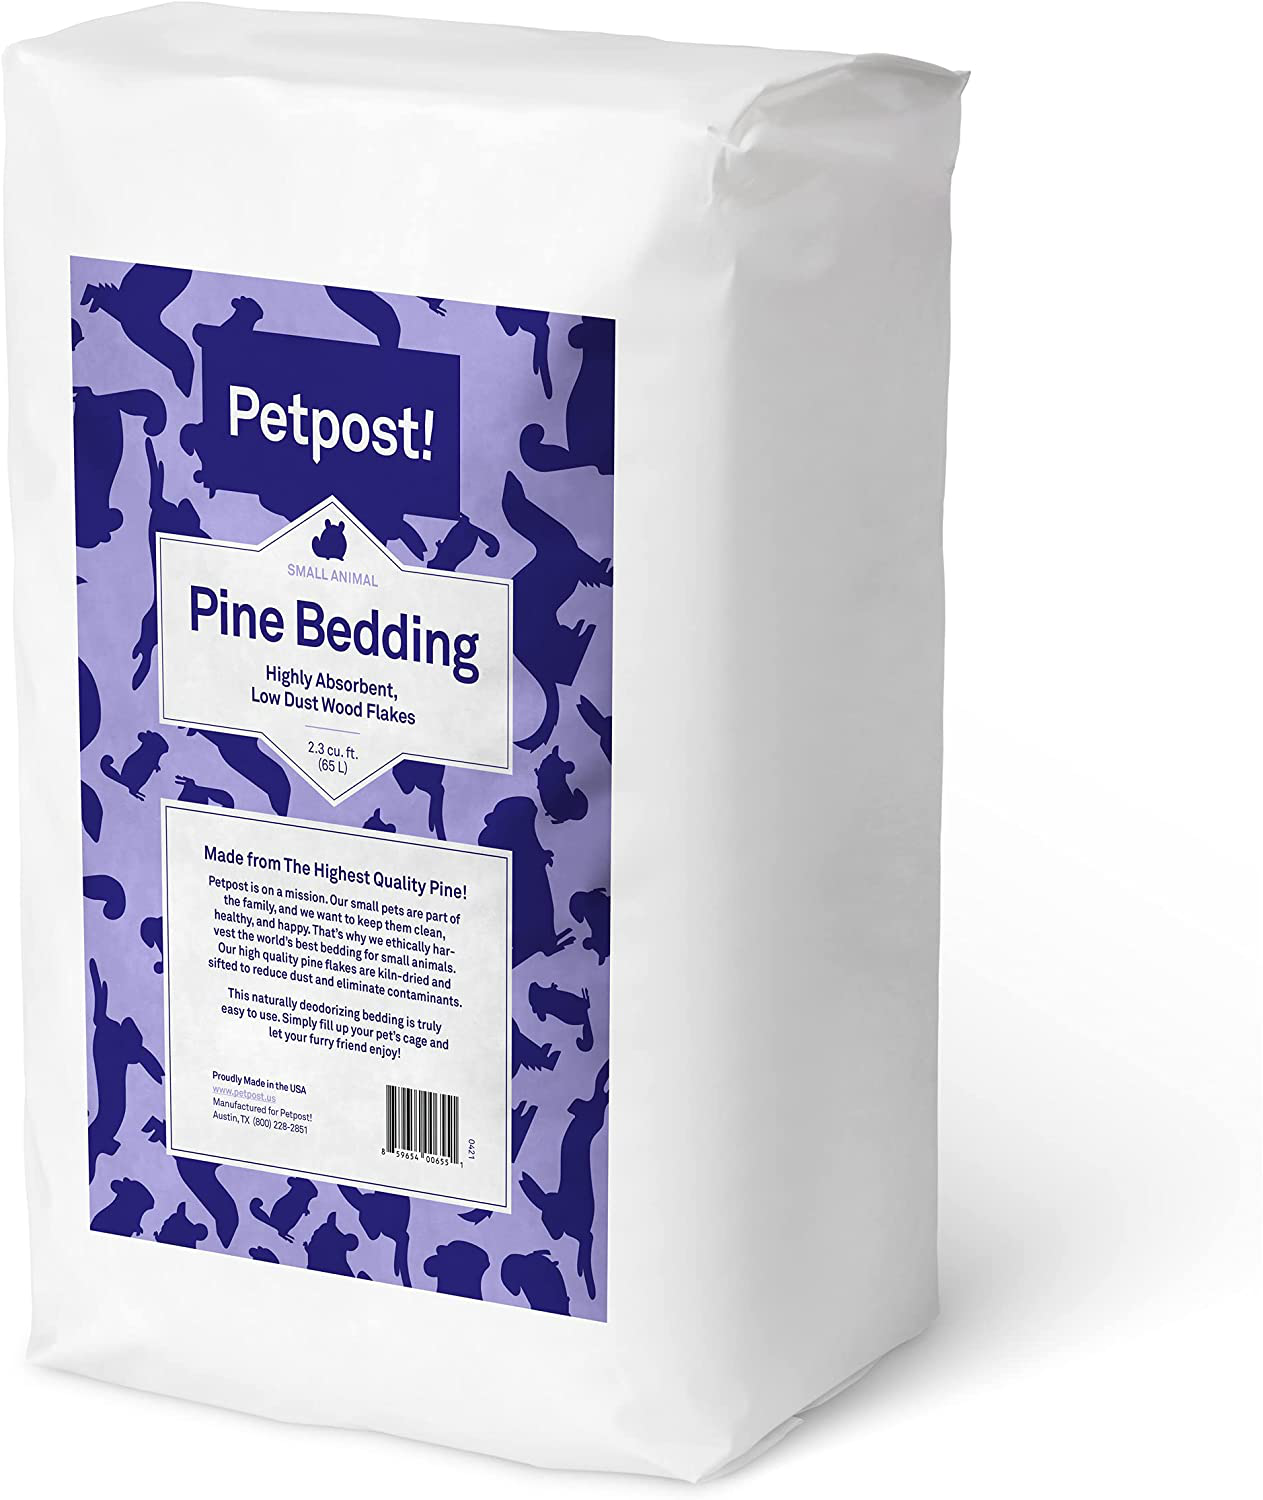 Petpost | Pine Bedding for Small Animals - 6 Cu.Ft. of Soft Wood Shavings for Rabbits, Guinea Pigs, & Hedgehog Habitats - Low Dust Cage Bedding for Pets